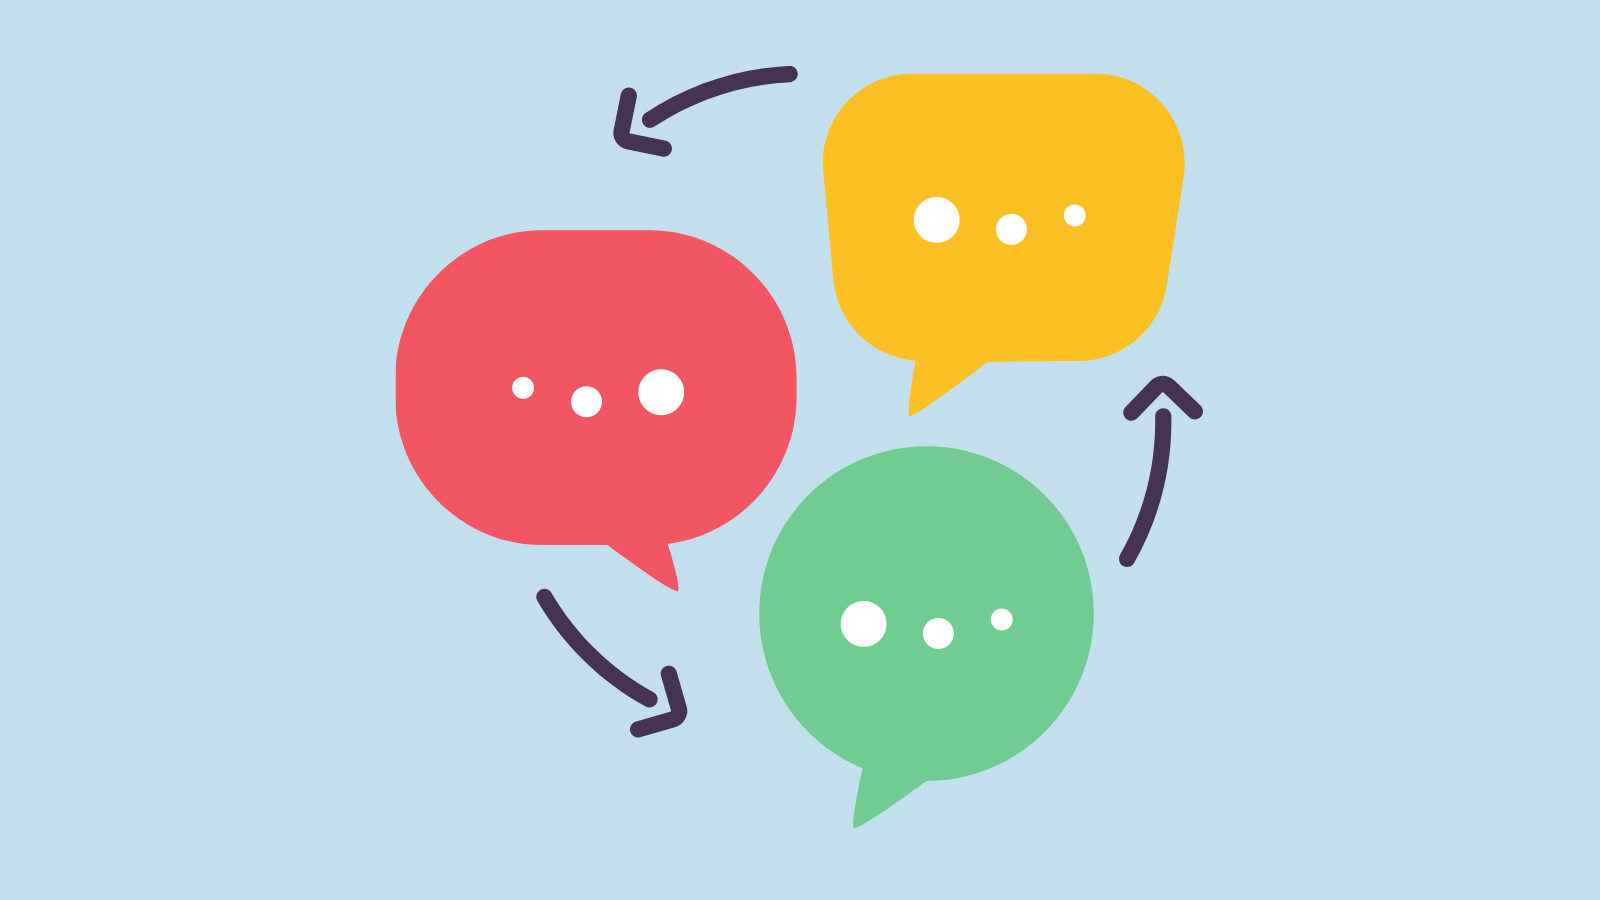 Three speech bubbles of different colors and shapes with arrows pointing to each other